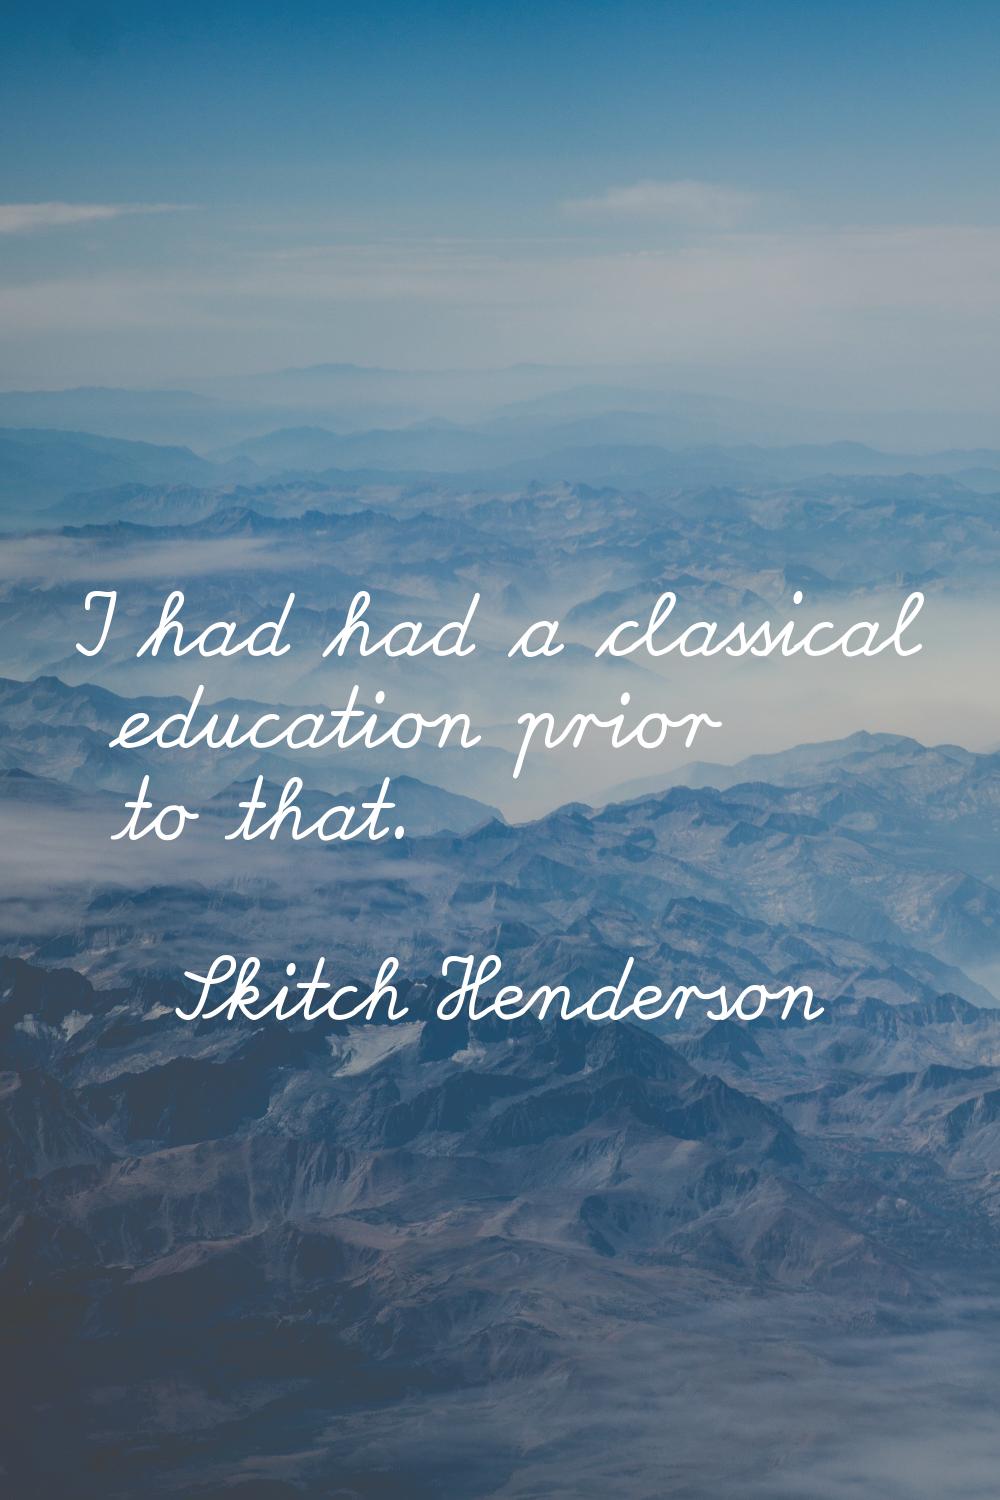 I had had a classical education prior to that.